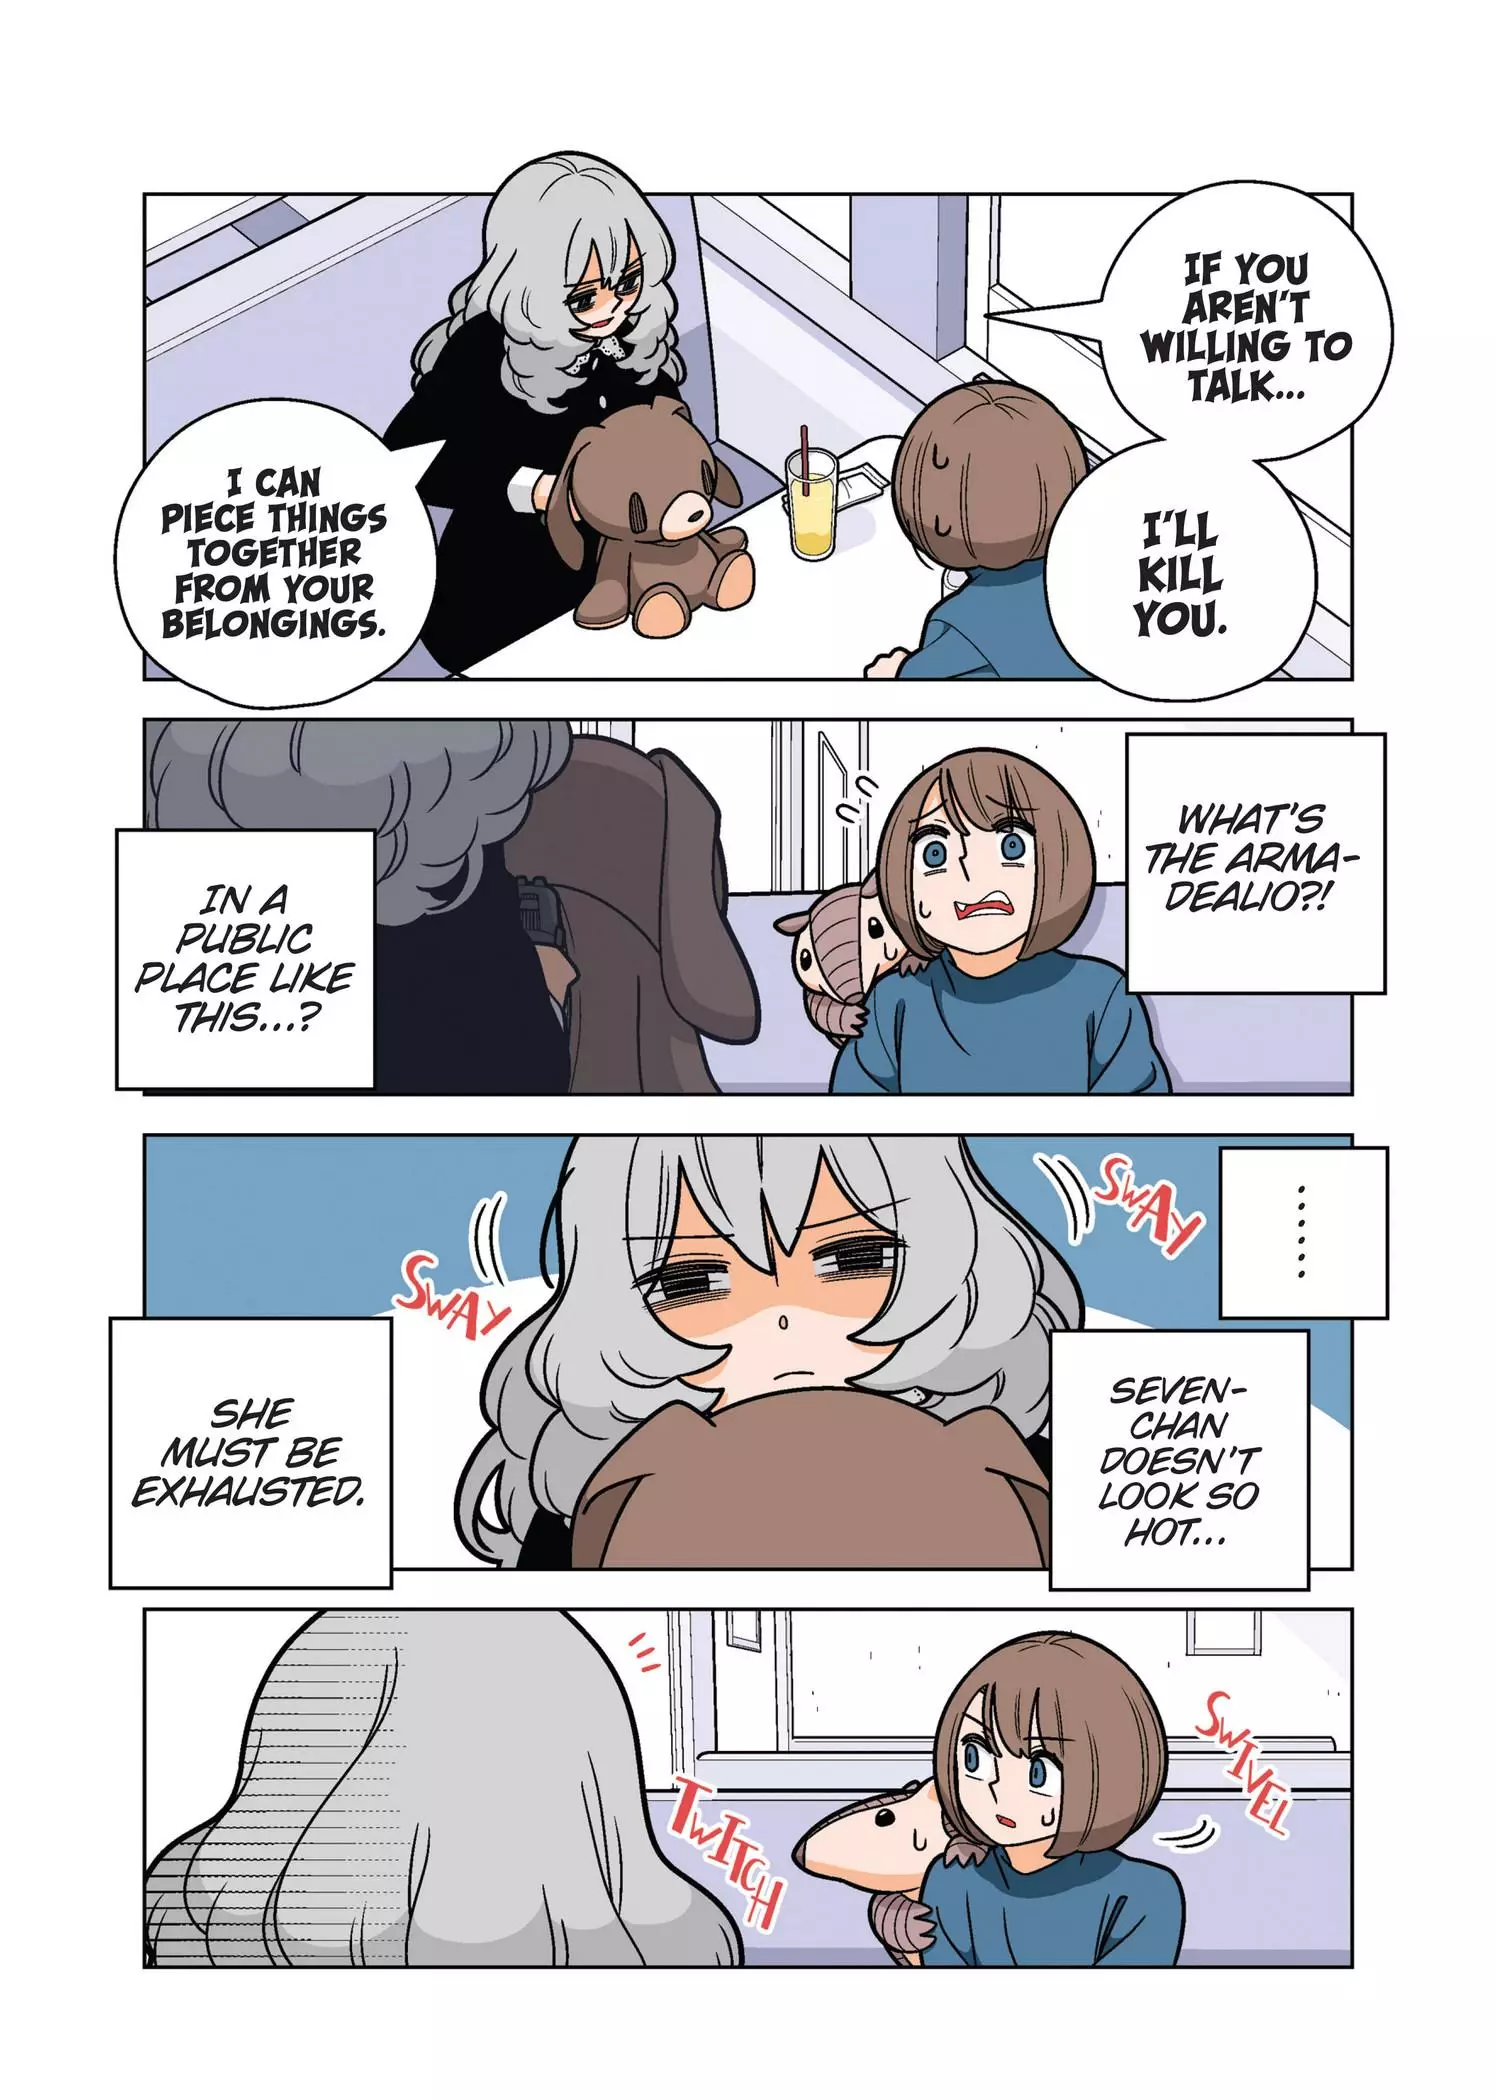 Kanako's Life As An Assassin - 72 page 8-8bf625af